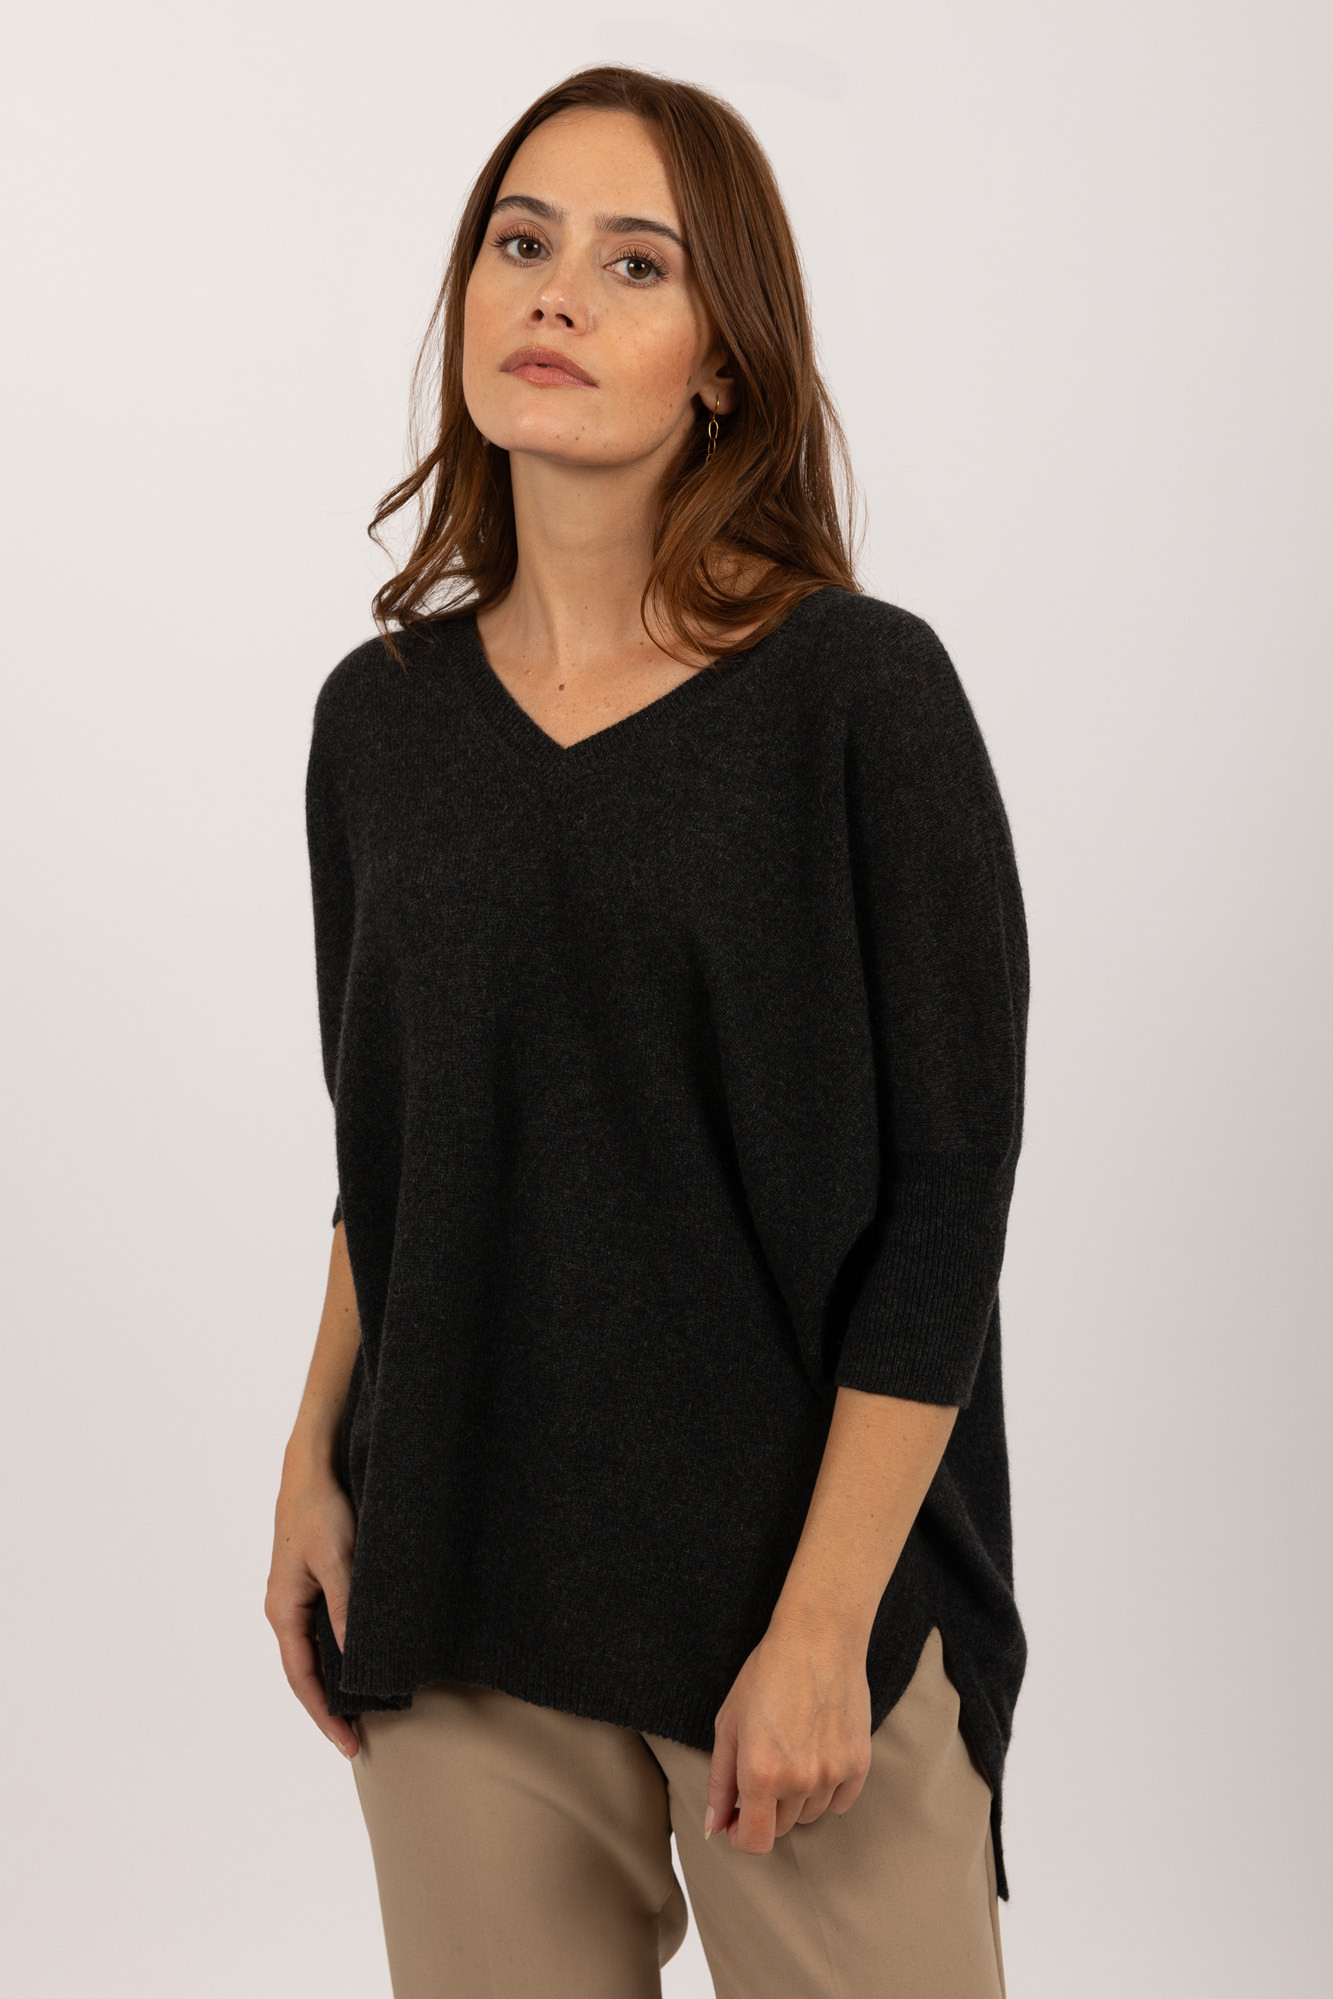 Short sleeve jumper 100% Cashmere in Charcoal Grey | Italy in Cashmere US